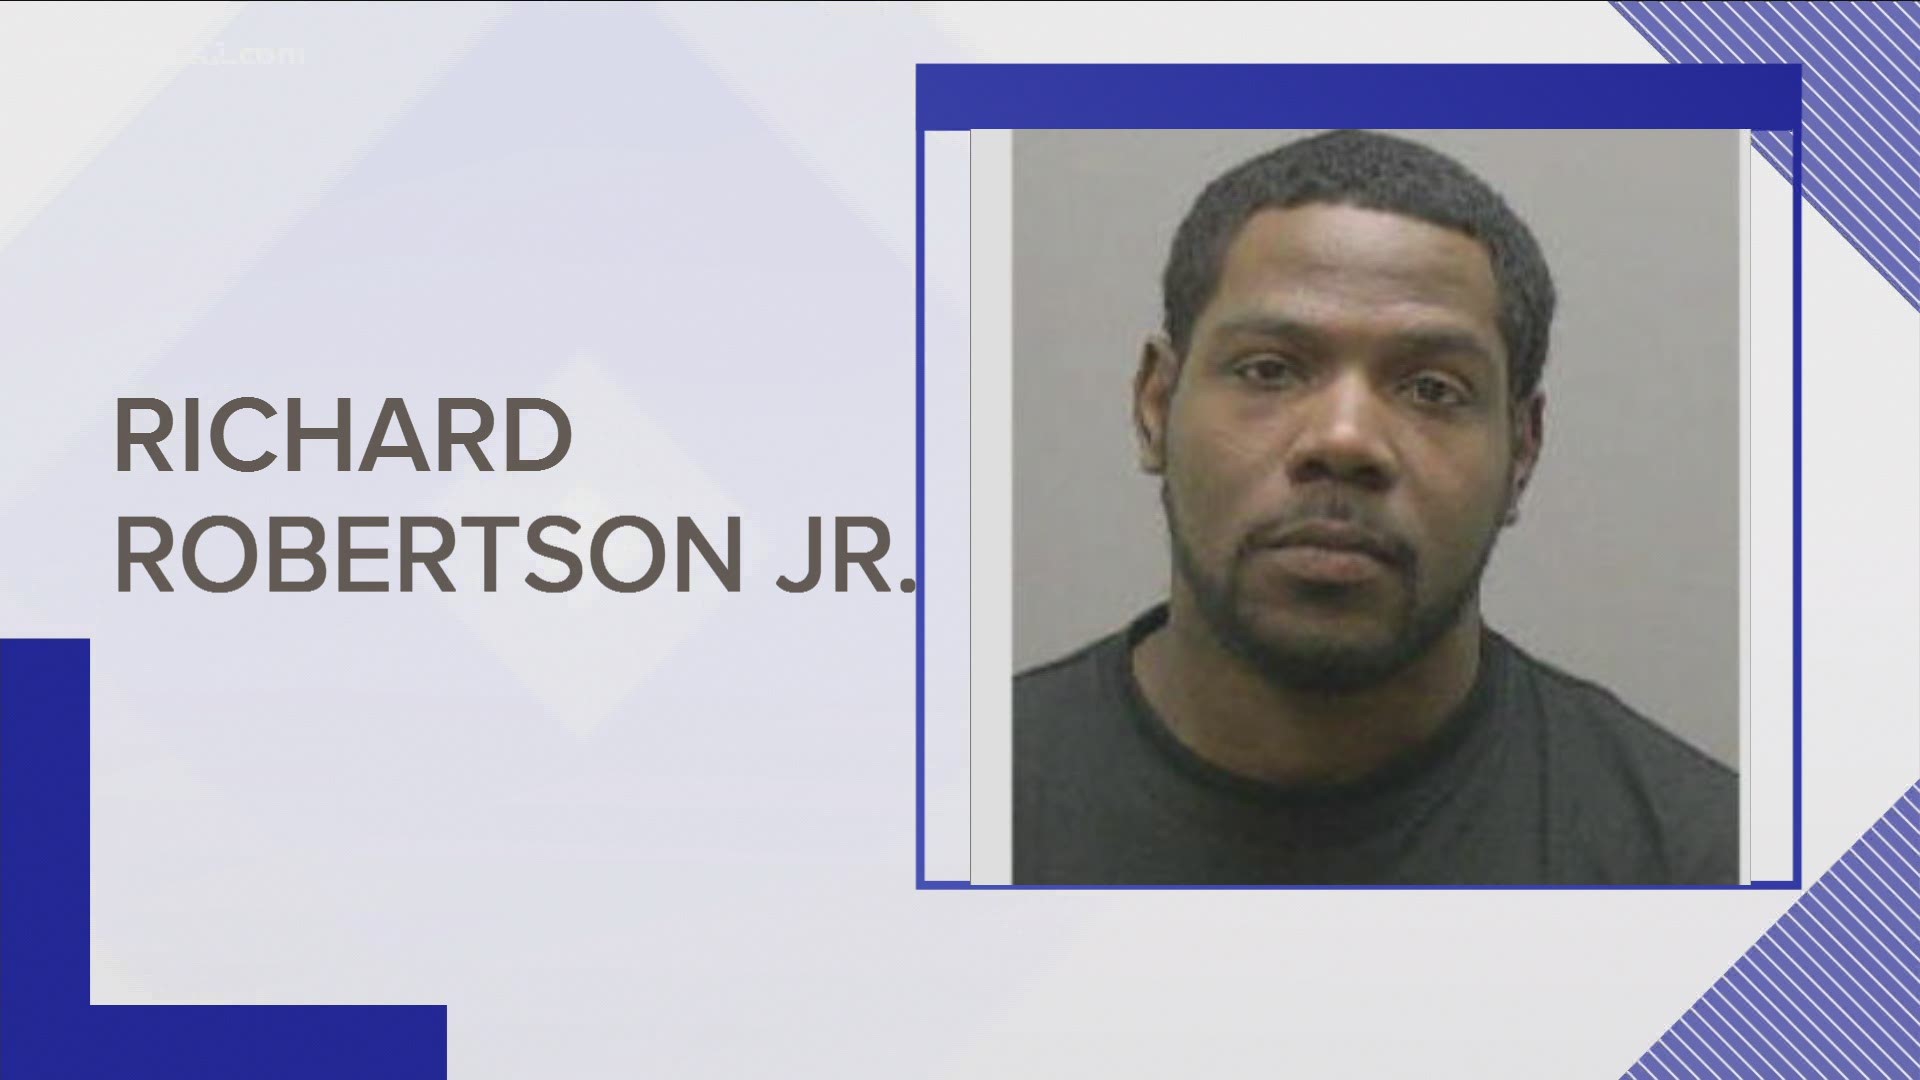 Burlington Police say Richard Robertson Jr. is wanted for shooting another man early Sunday morning.